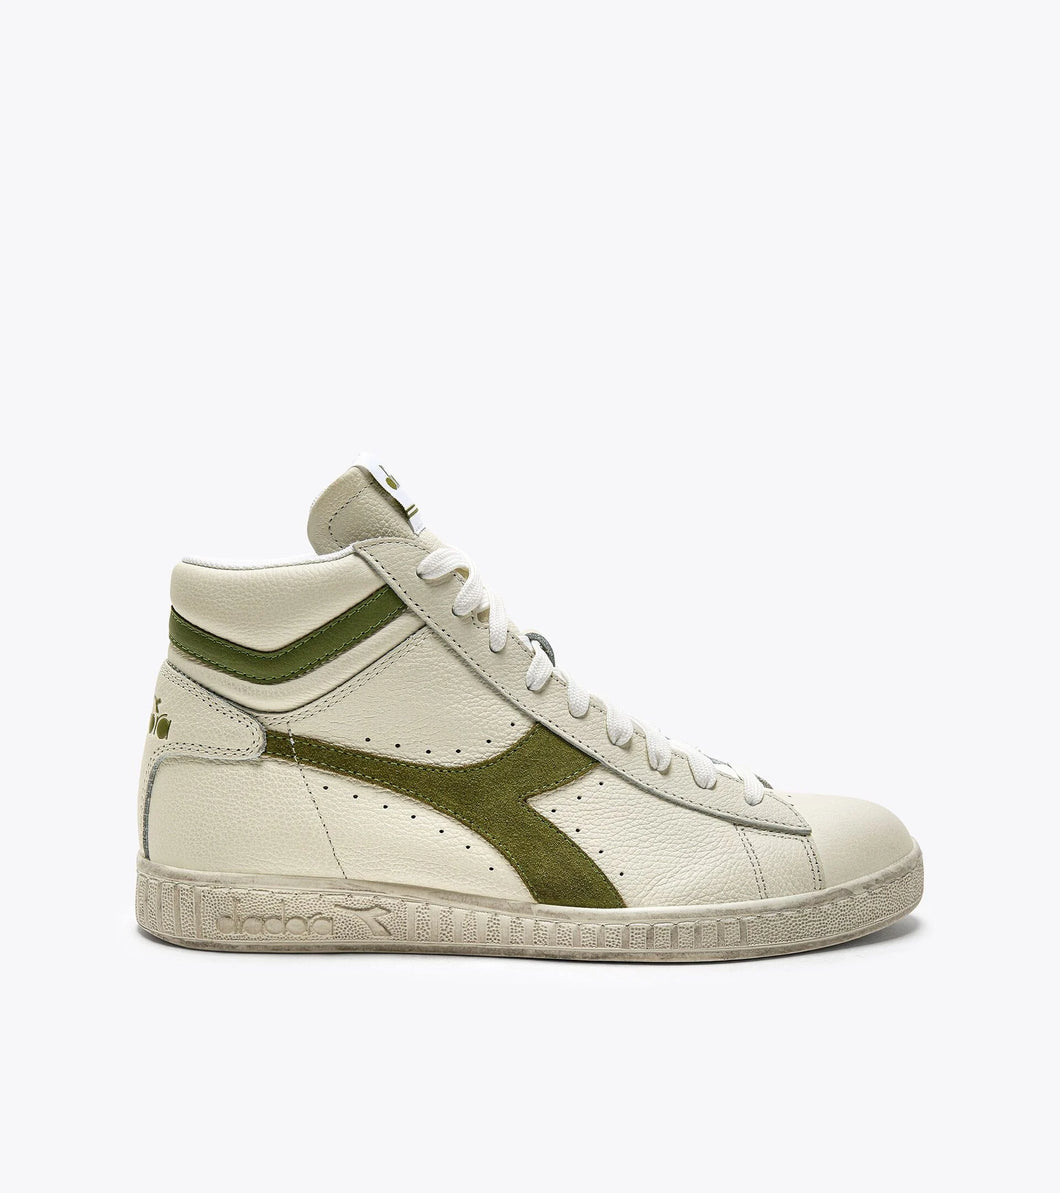 GAME L HIGH WAXED SUEDE POP White Fern